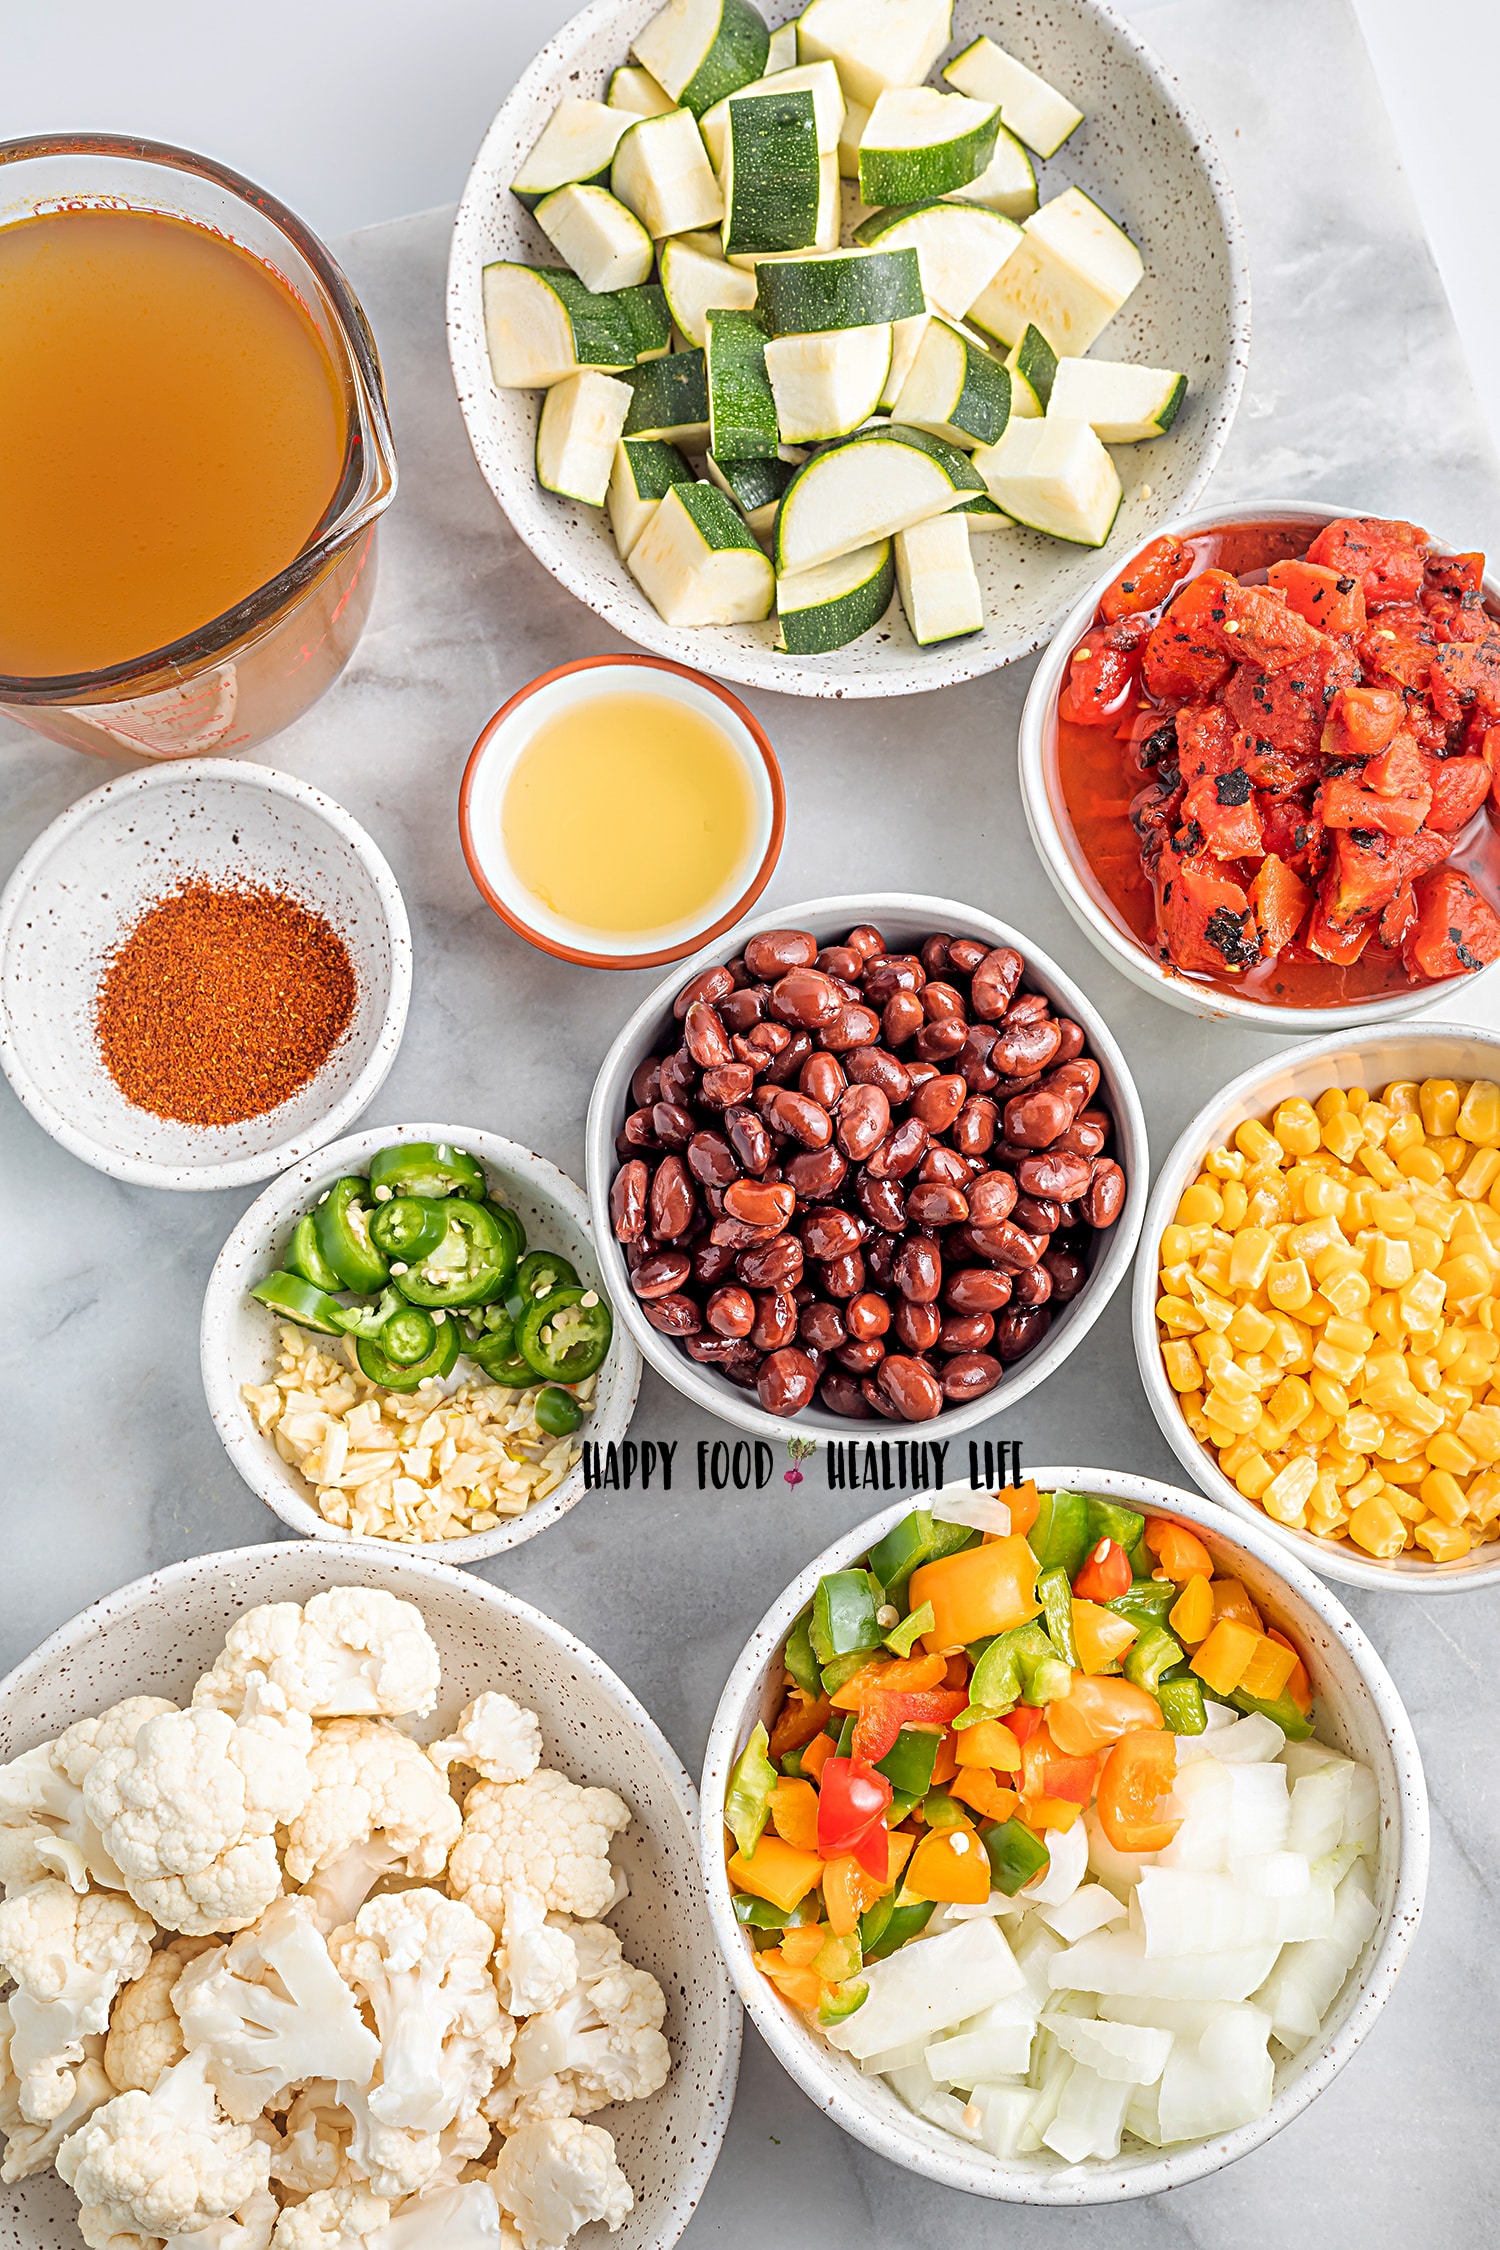 Top view photo of all the ingredients to make Vegan Tortilla Soup in separate bowls.